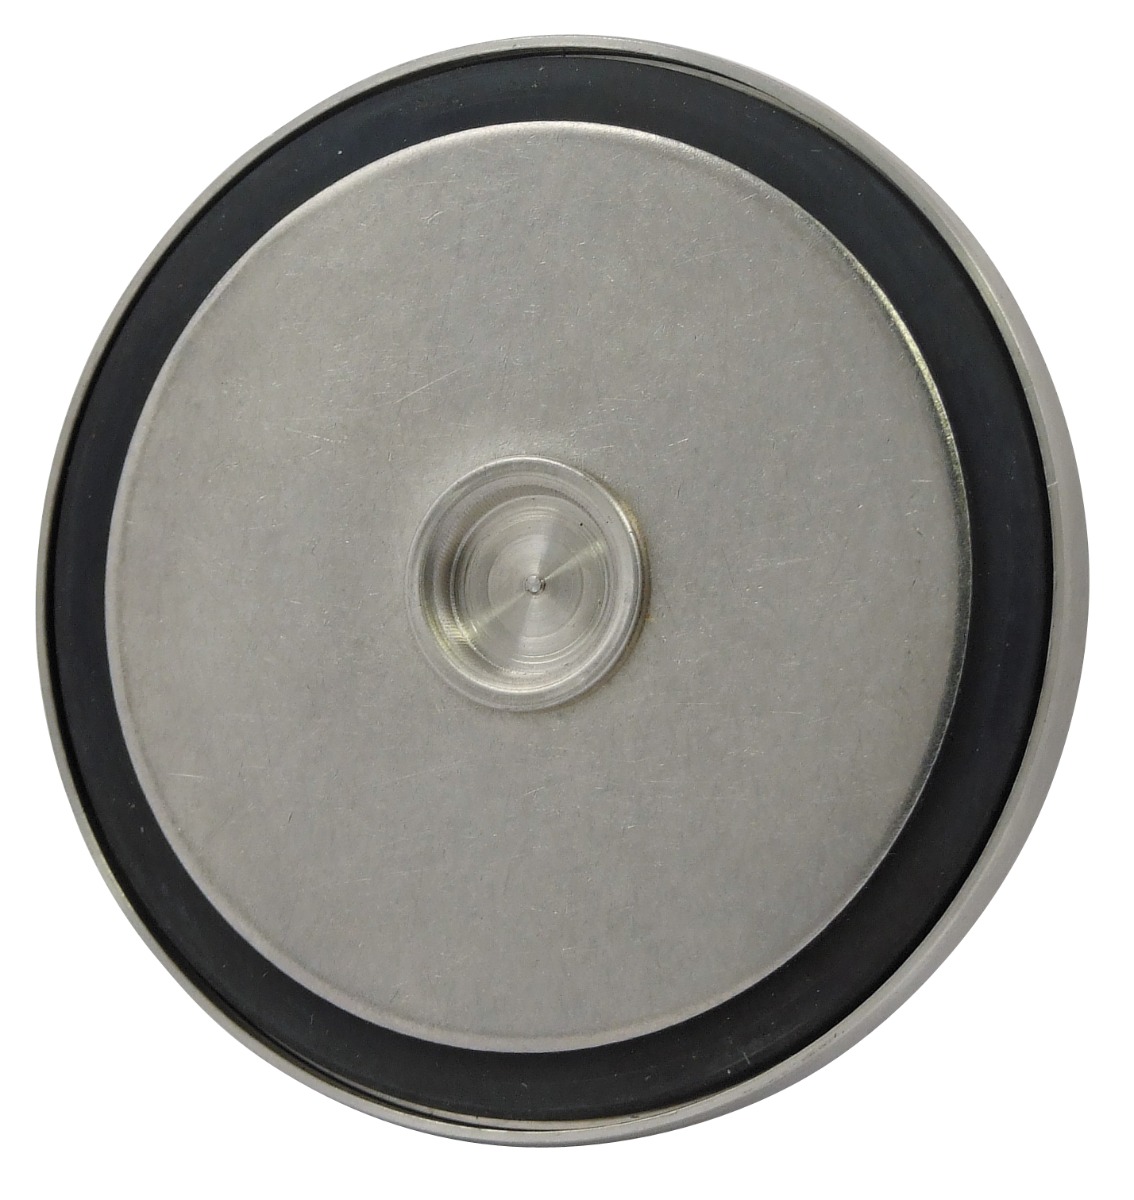 65mm EPDM Seat Disc for RK86B